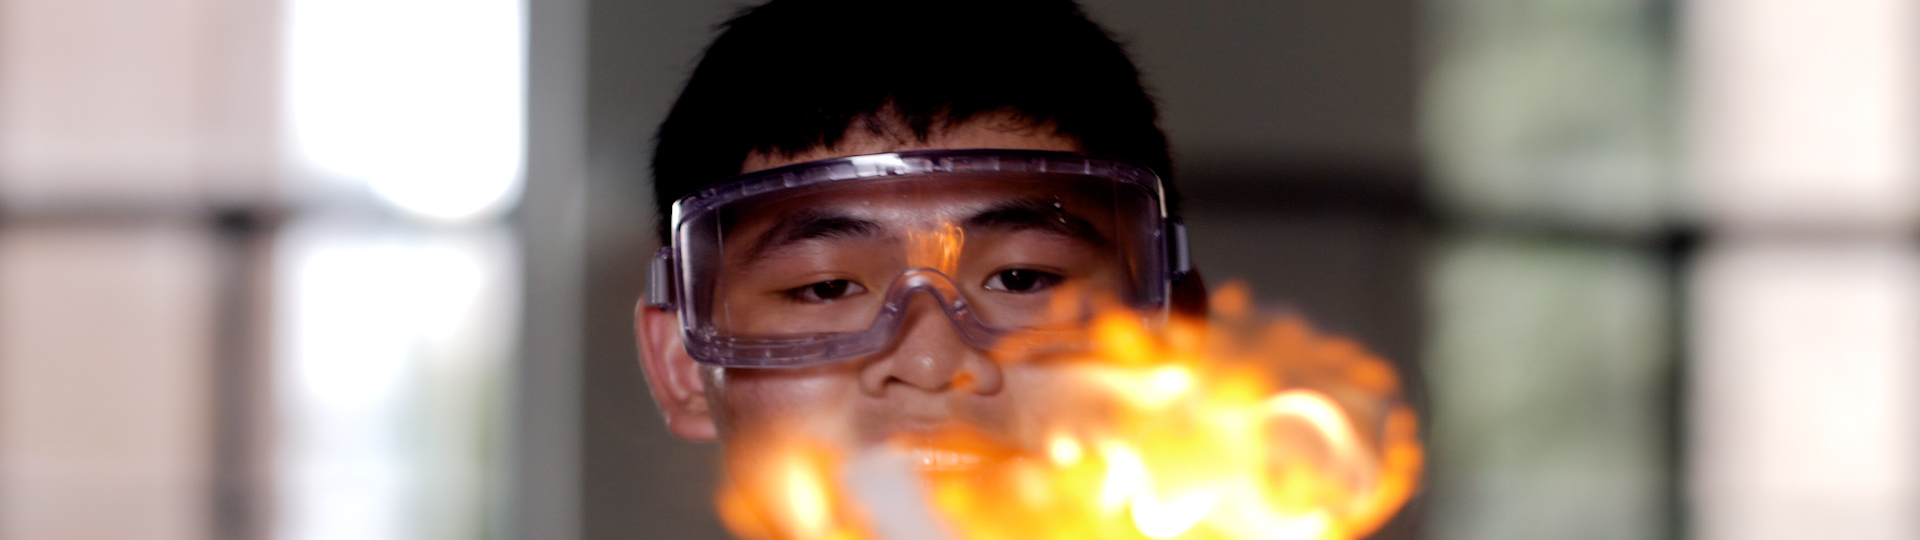 Chemistry student with PPE making explosion in lab